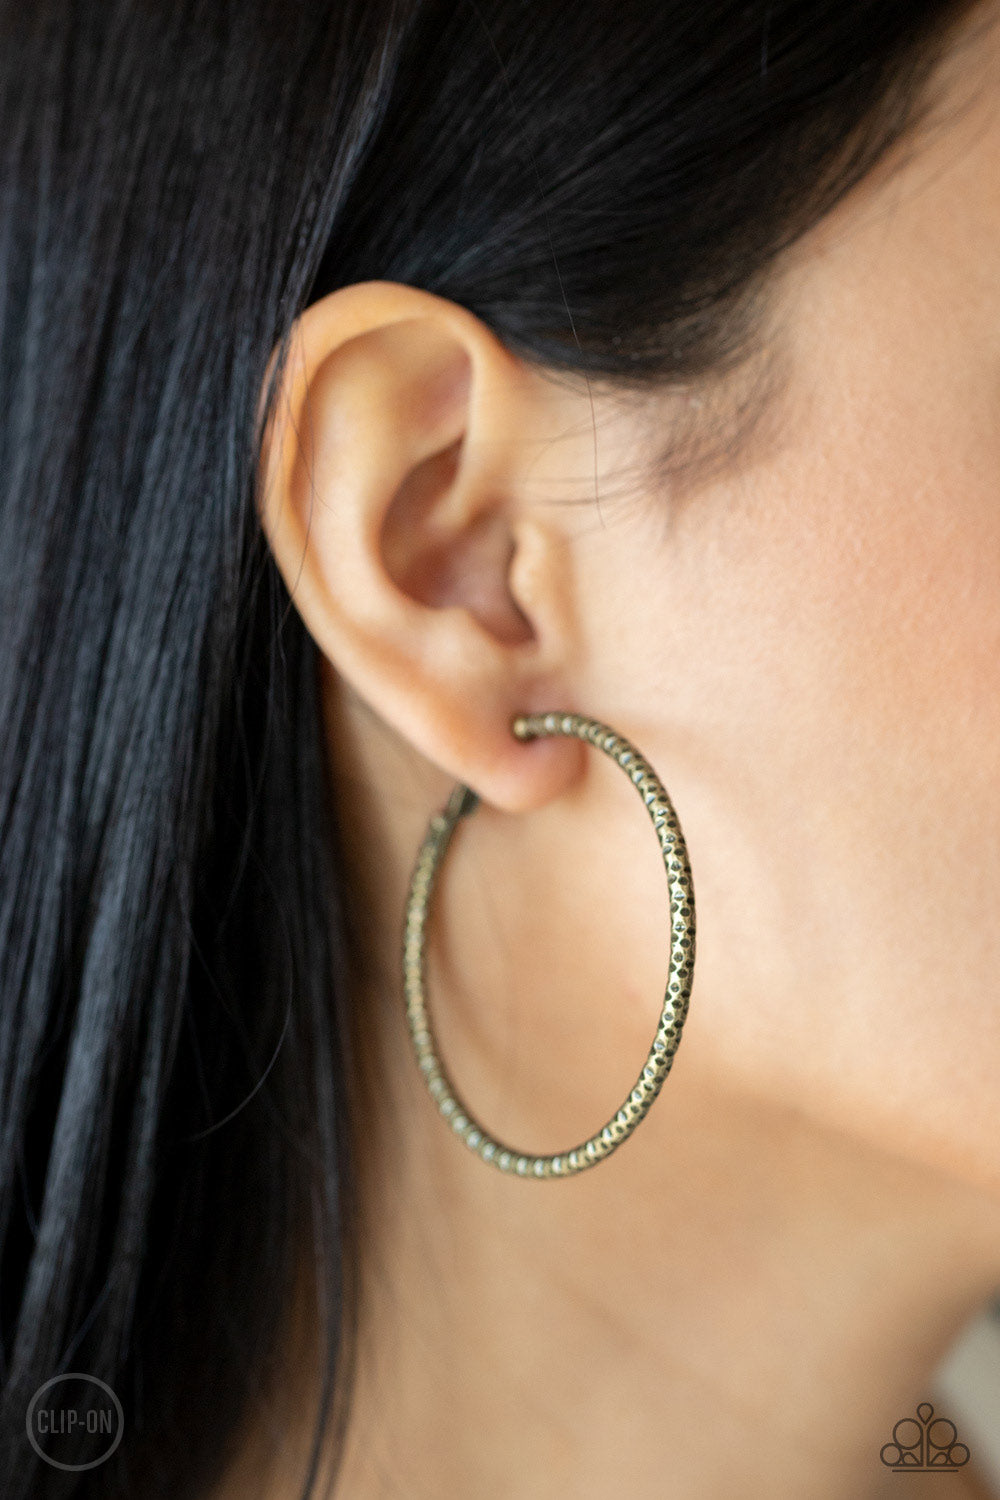 Subtly Sassy Brass Clip-On Hoop Earring - Paparazzi Accessories  An oversized brass hoop featuring a porous-like texture sends off a subtle shimmer as it wraps around the ear. Earring attaches to a standard clip-on fitting. Hoop measures approximately 2" in diameter.  All Paparazzi Accessories are lead free and nickel free!  Sold as one pair of earrings.